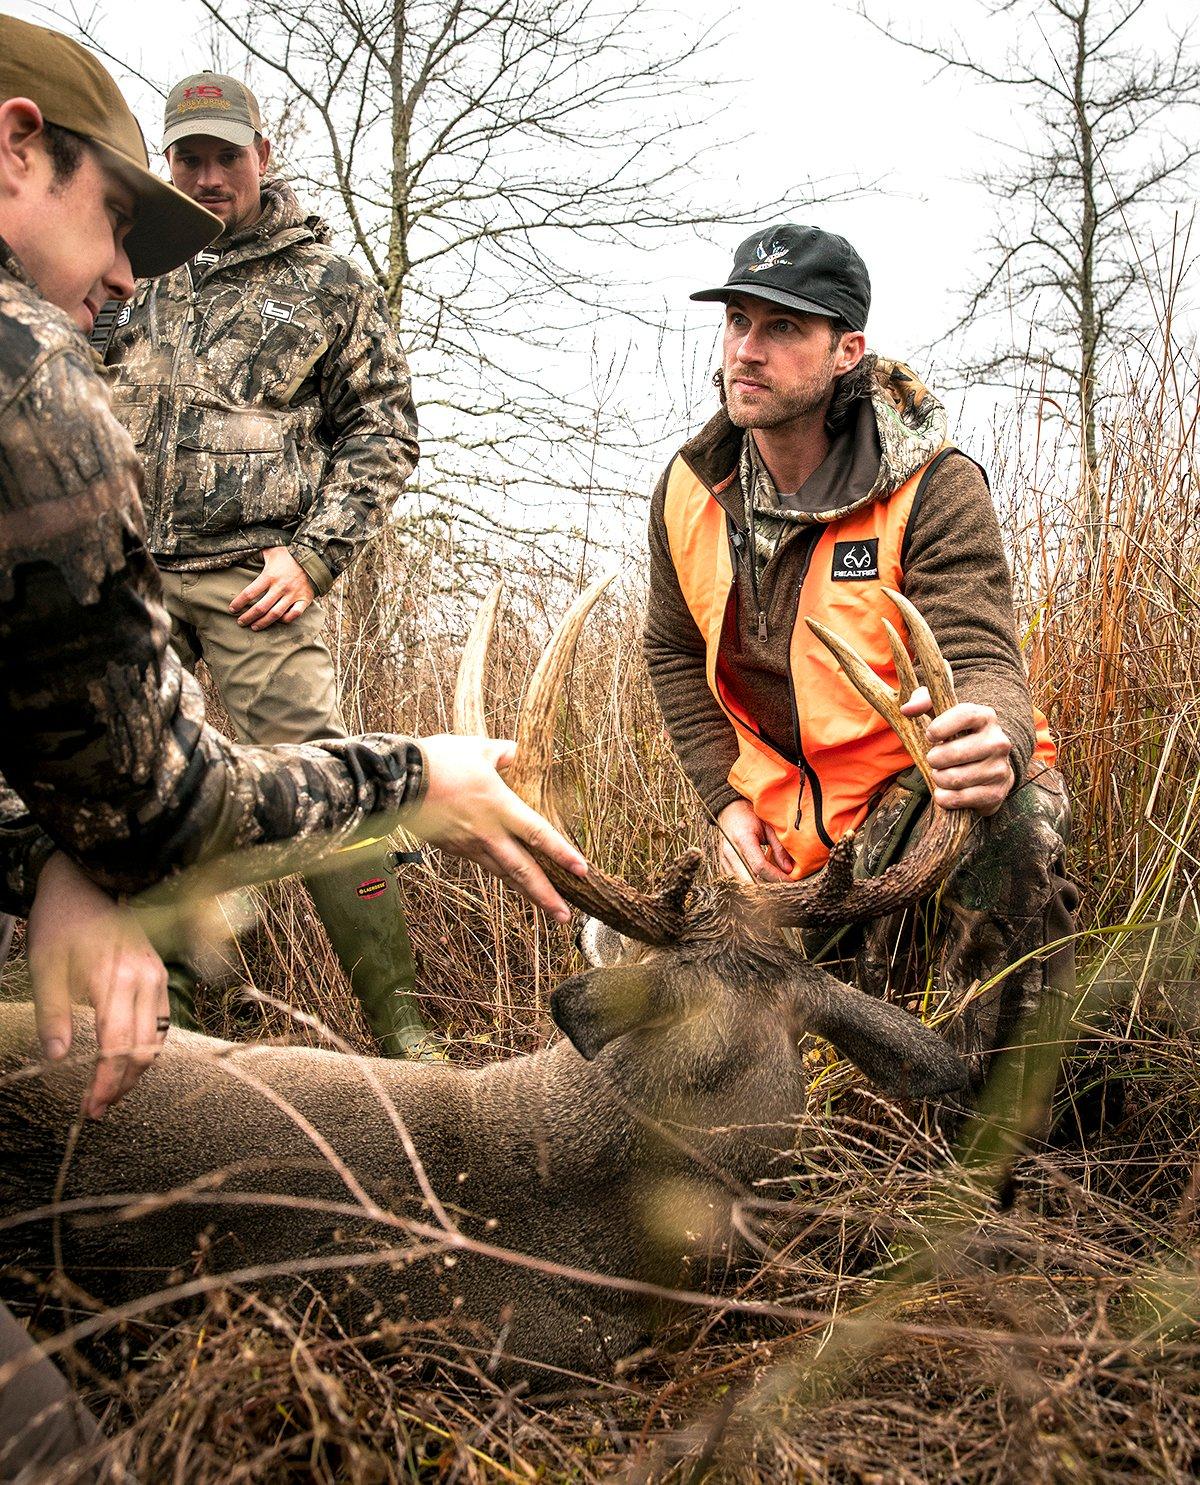 The average shot on a whitetail is just over 100 yards. Image by Realtree Media